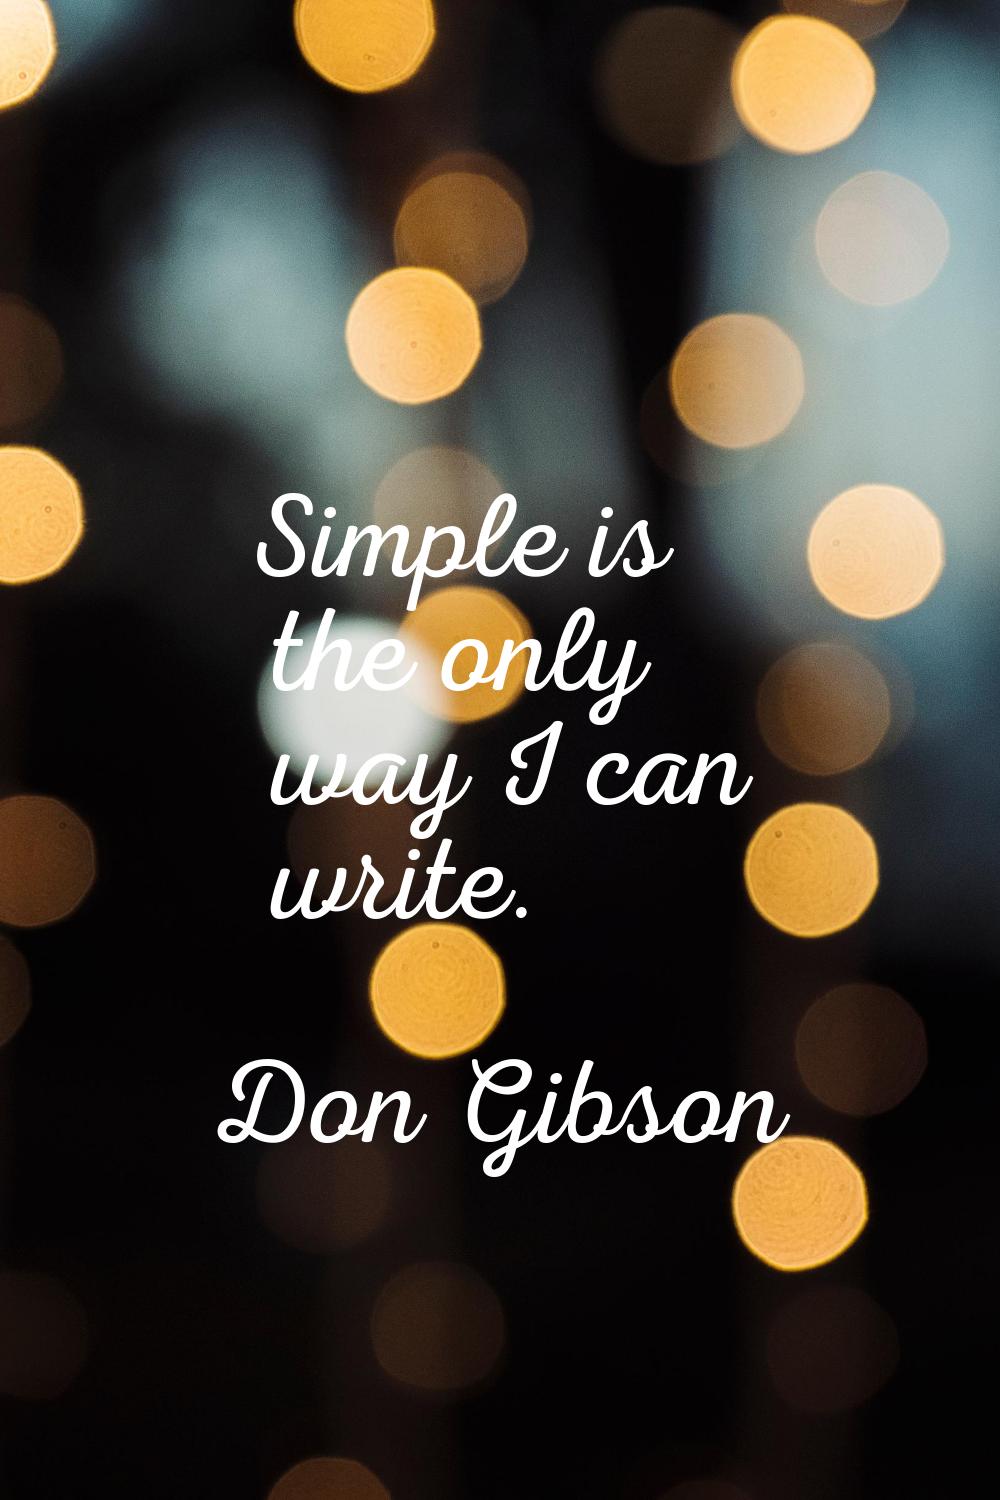 Simple is the only way I can write.